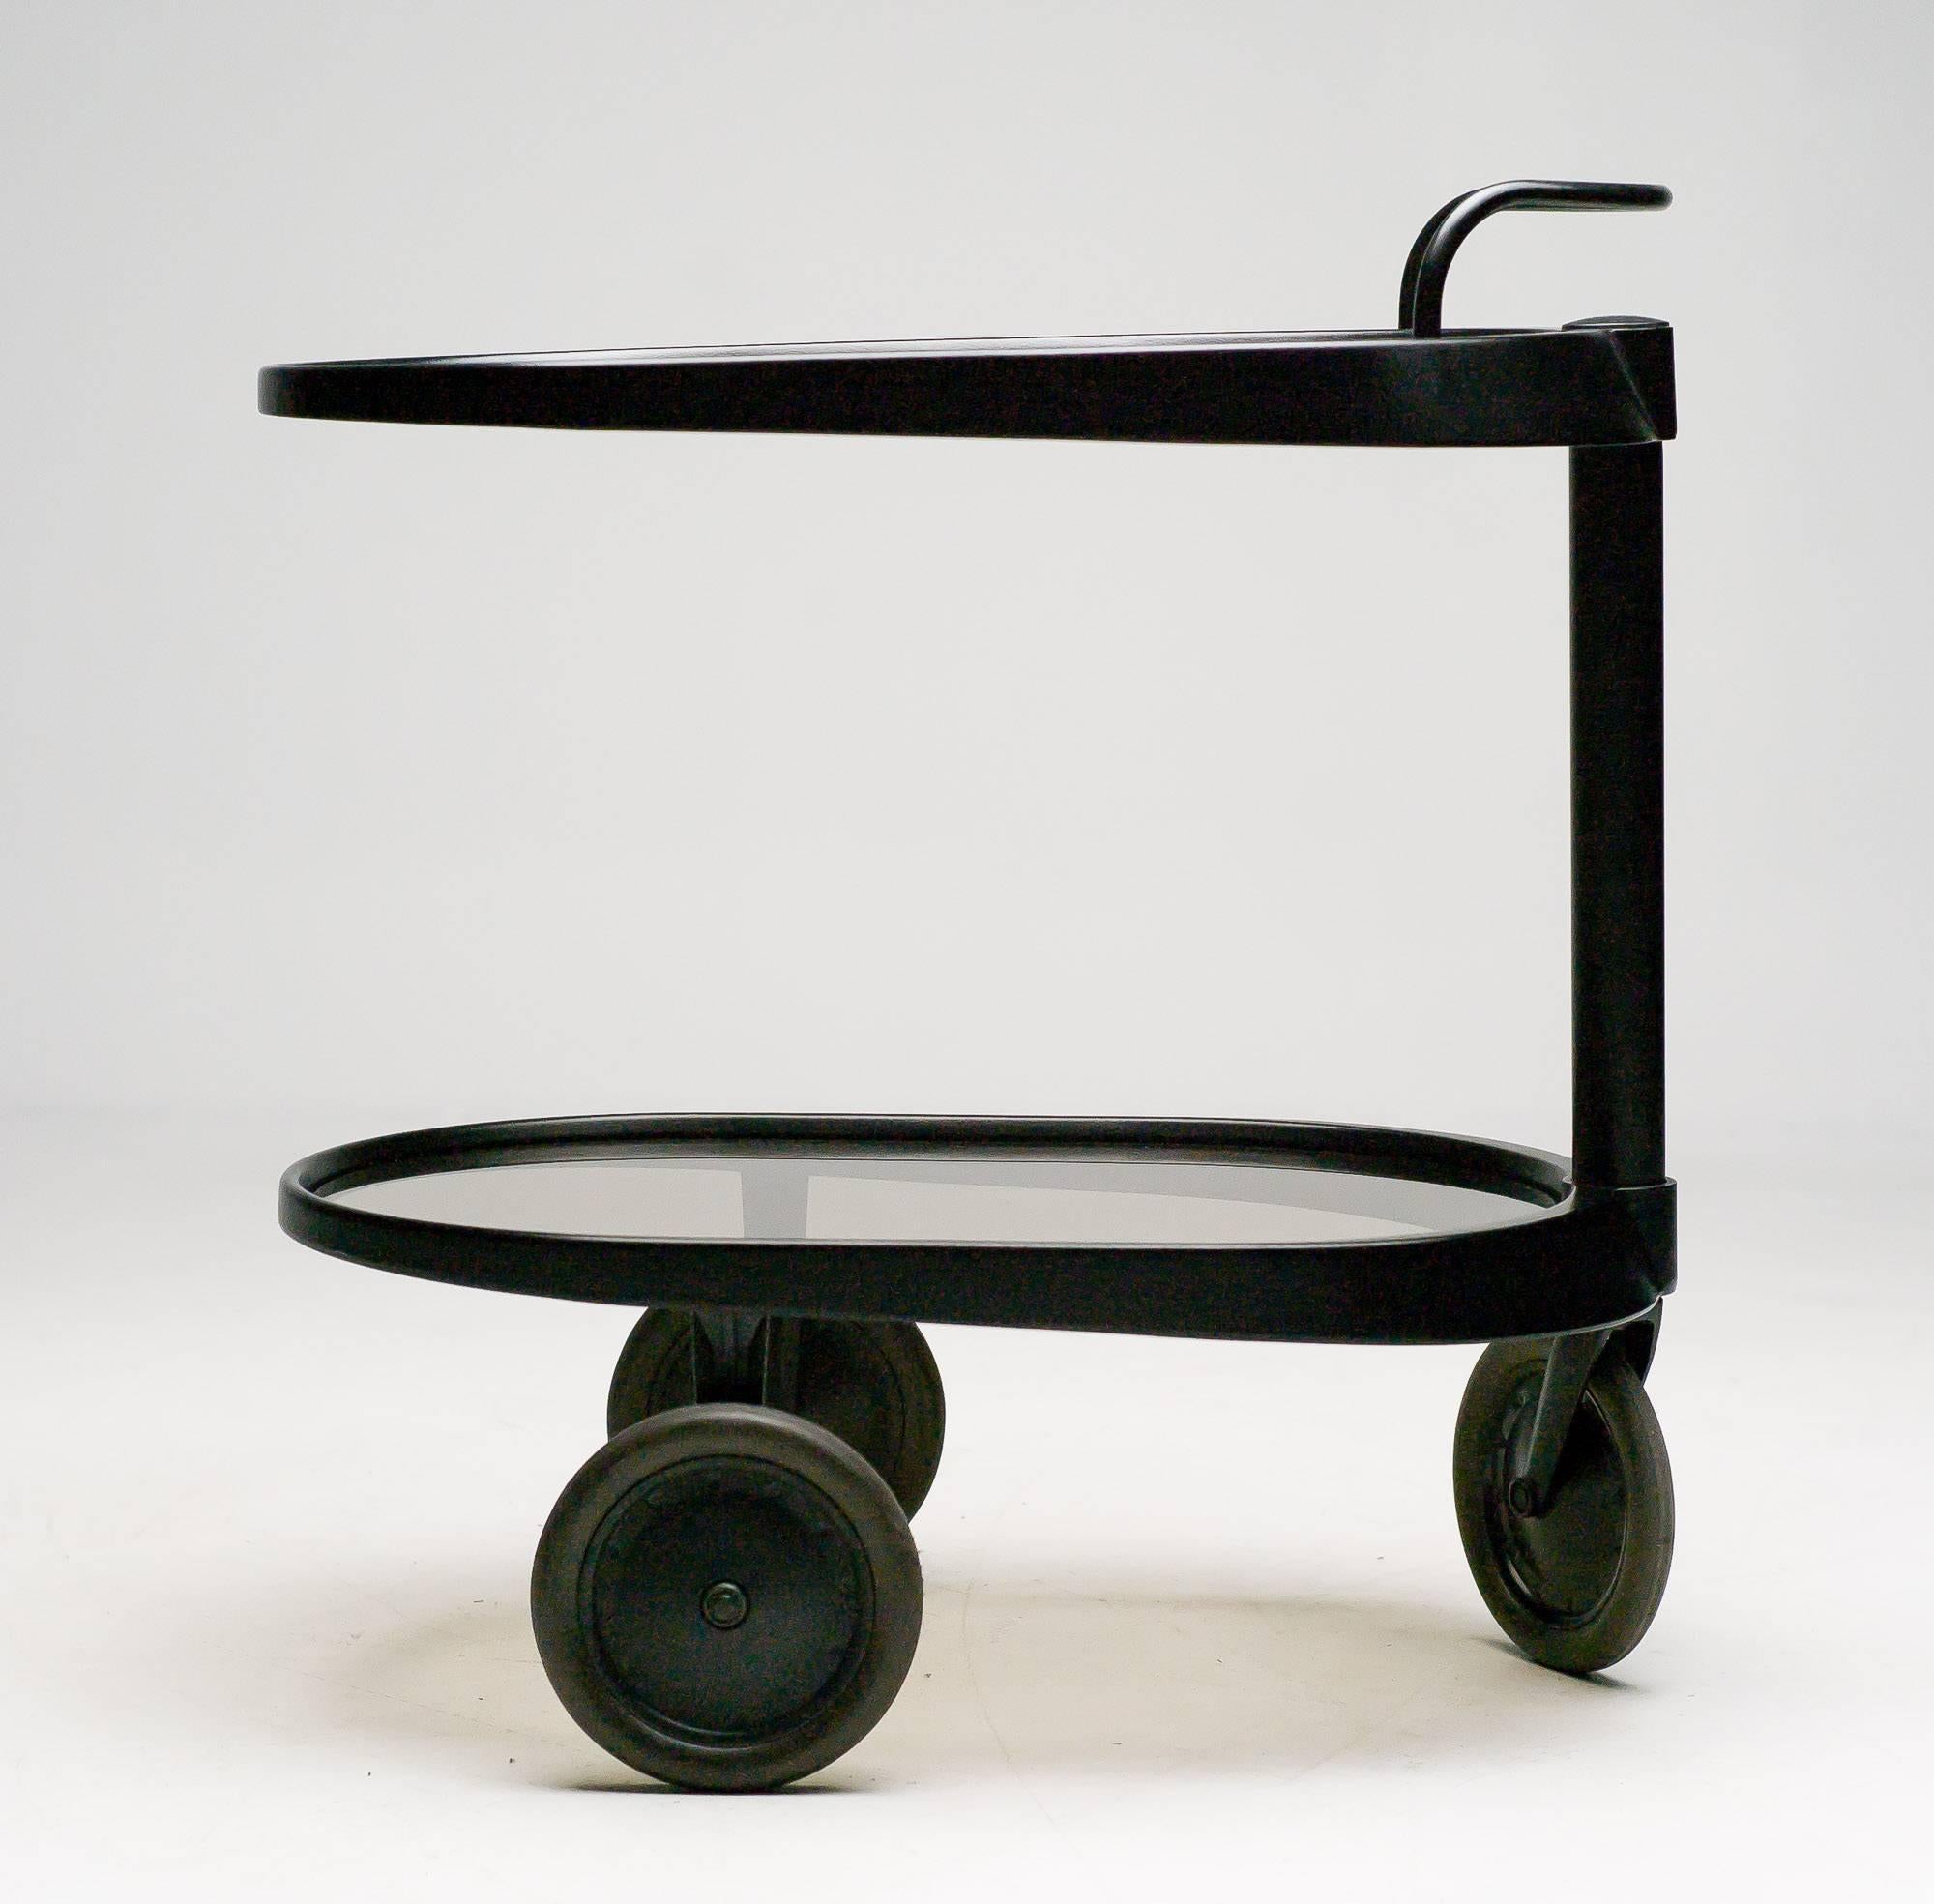 Painted Modern Trolley Designed by Enzo Mari for Alessi in 1989